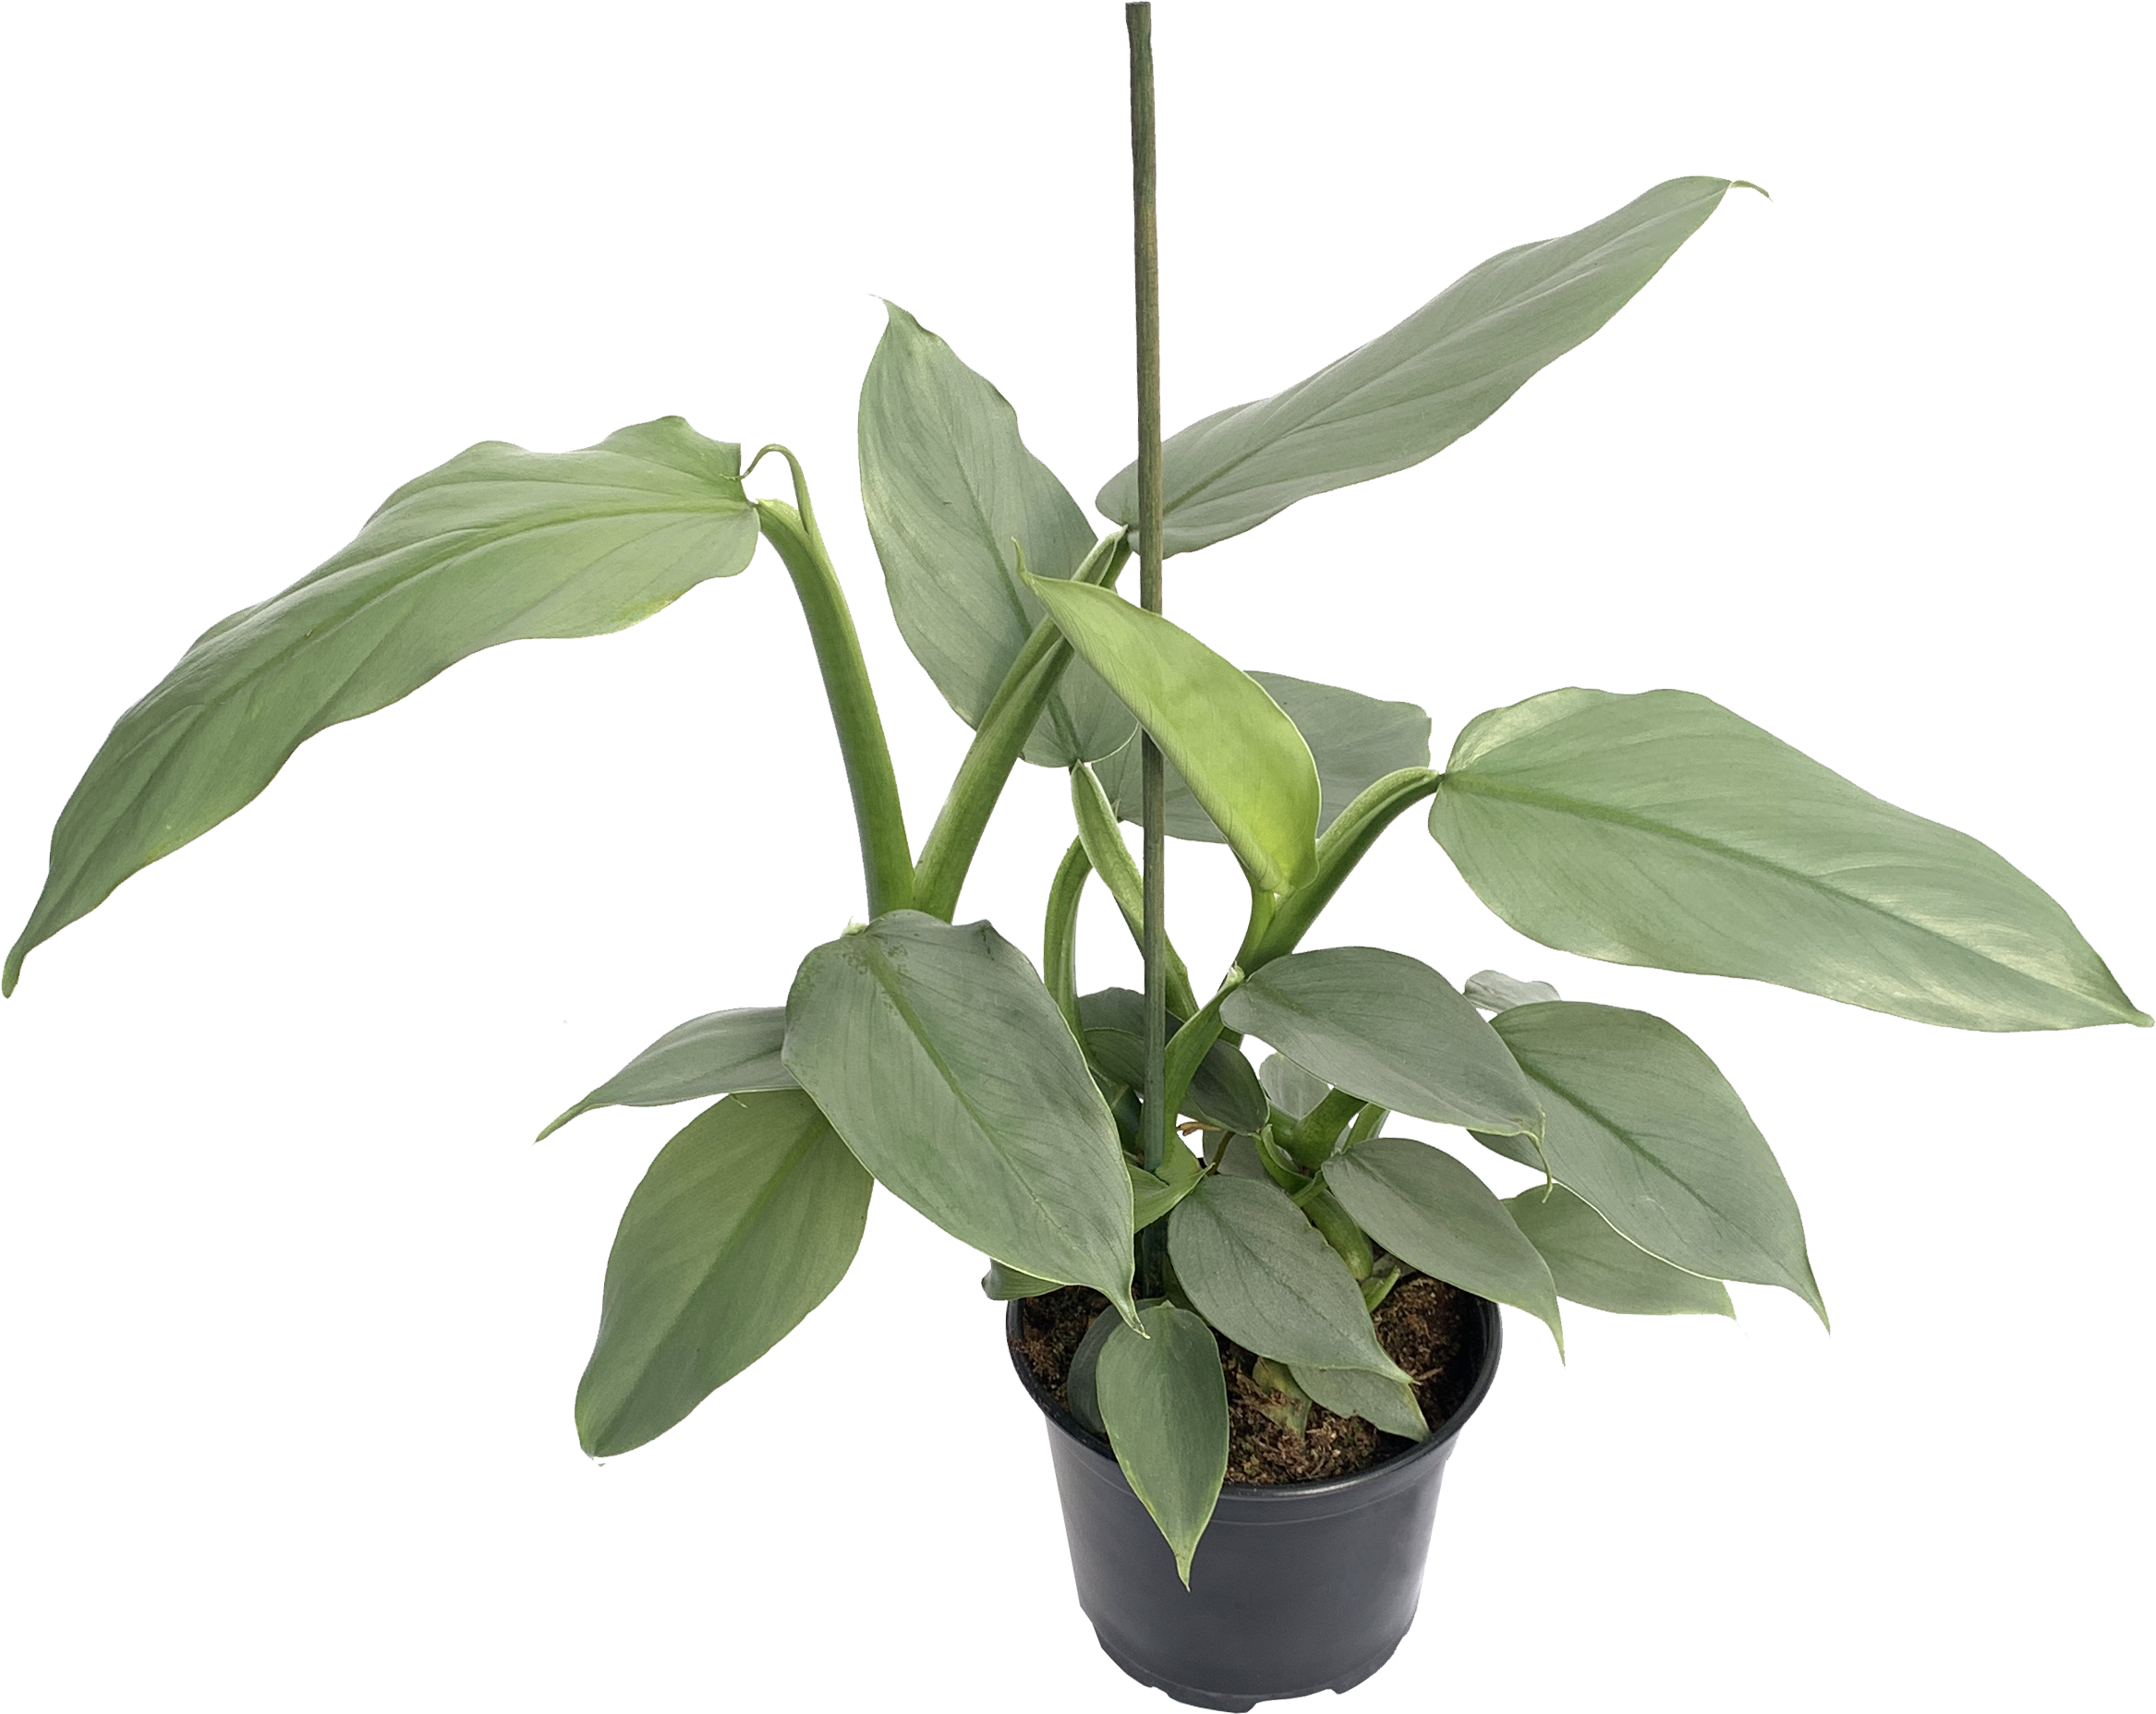 Silver Sword Philodendron, Philodendron Hastatum